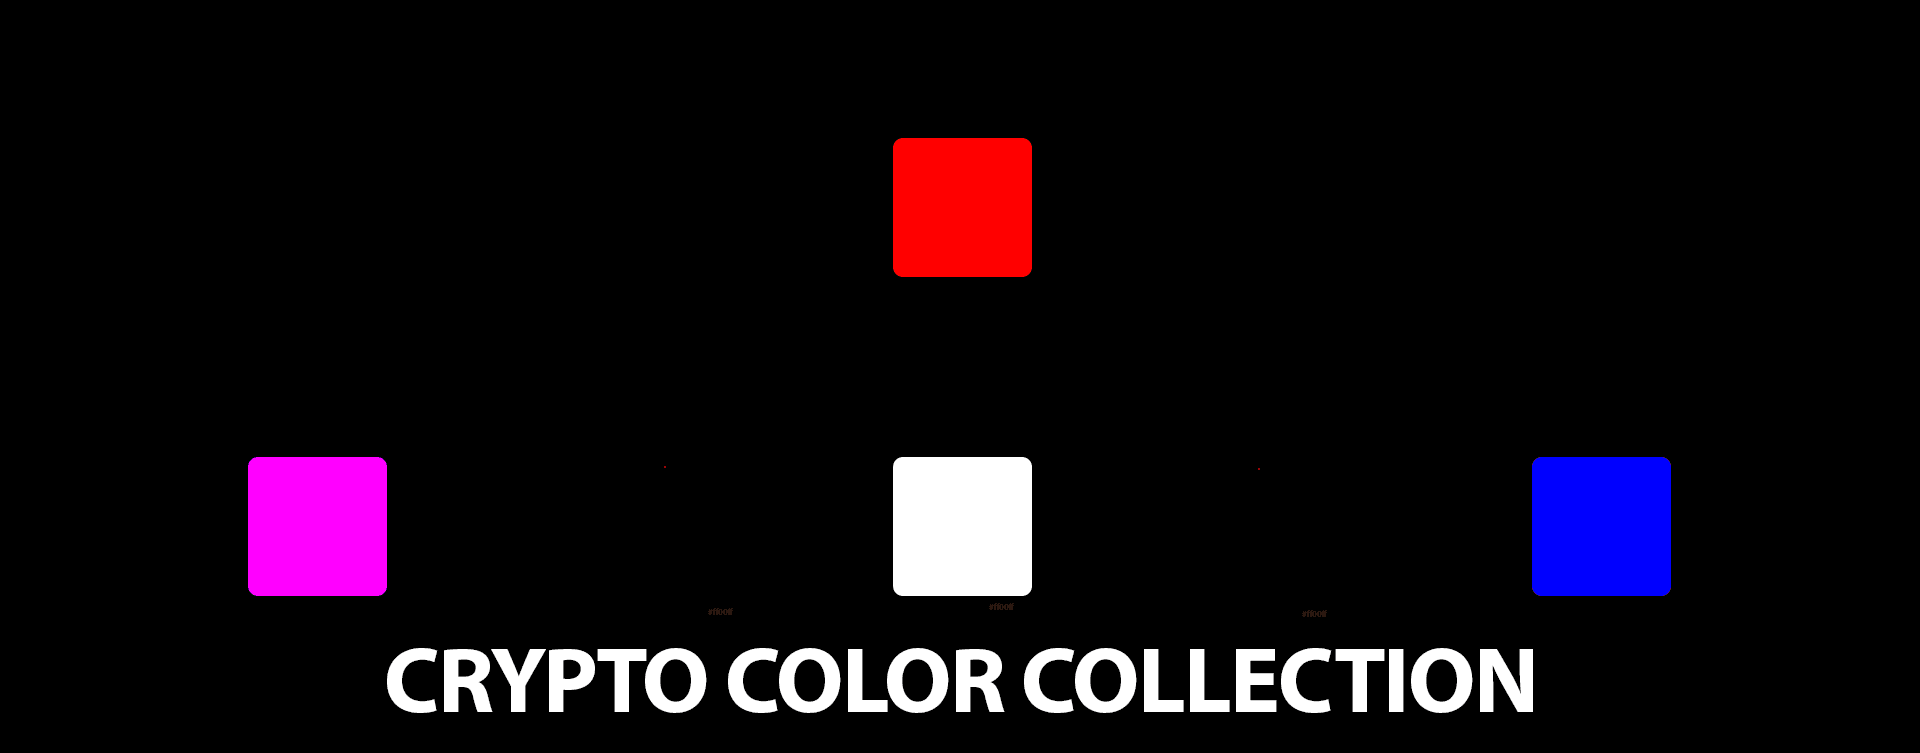 CryptoColorCollection banner